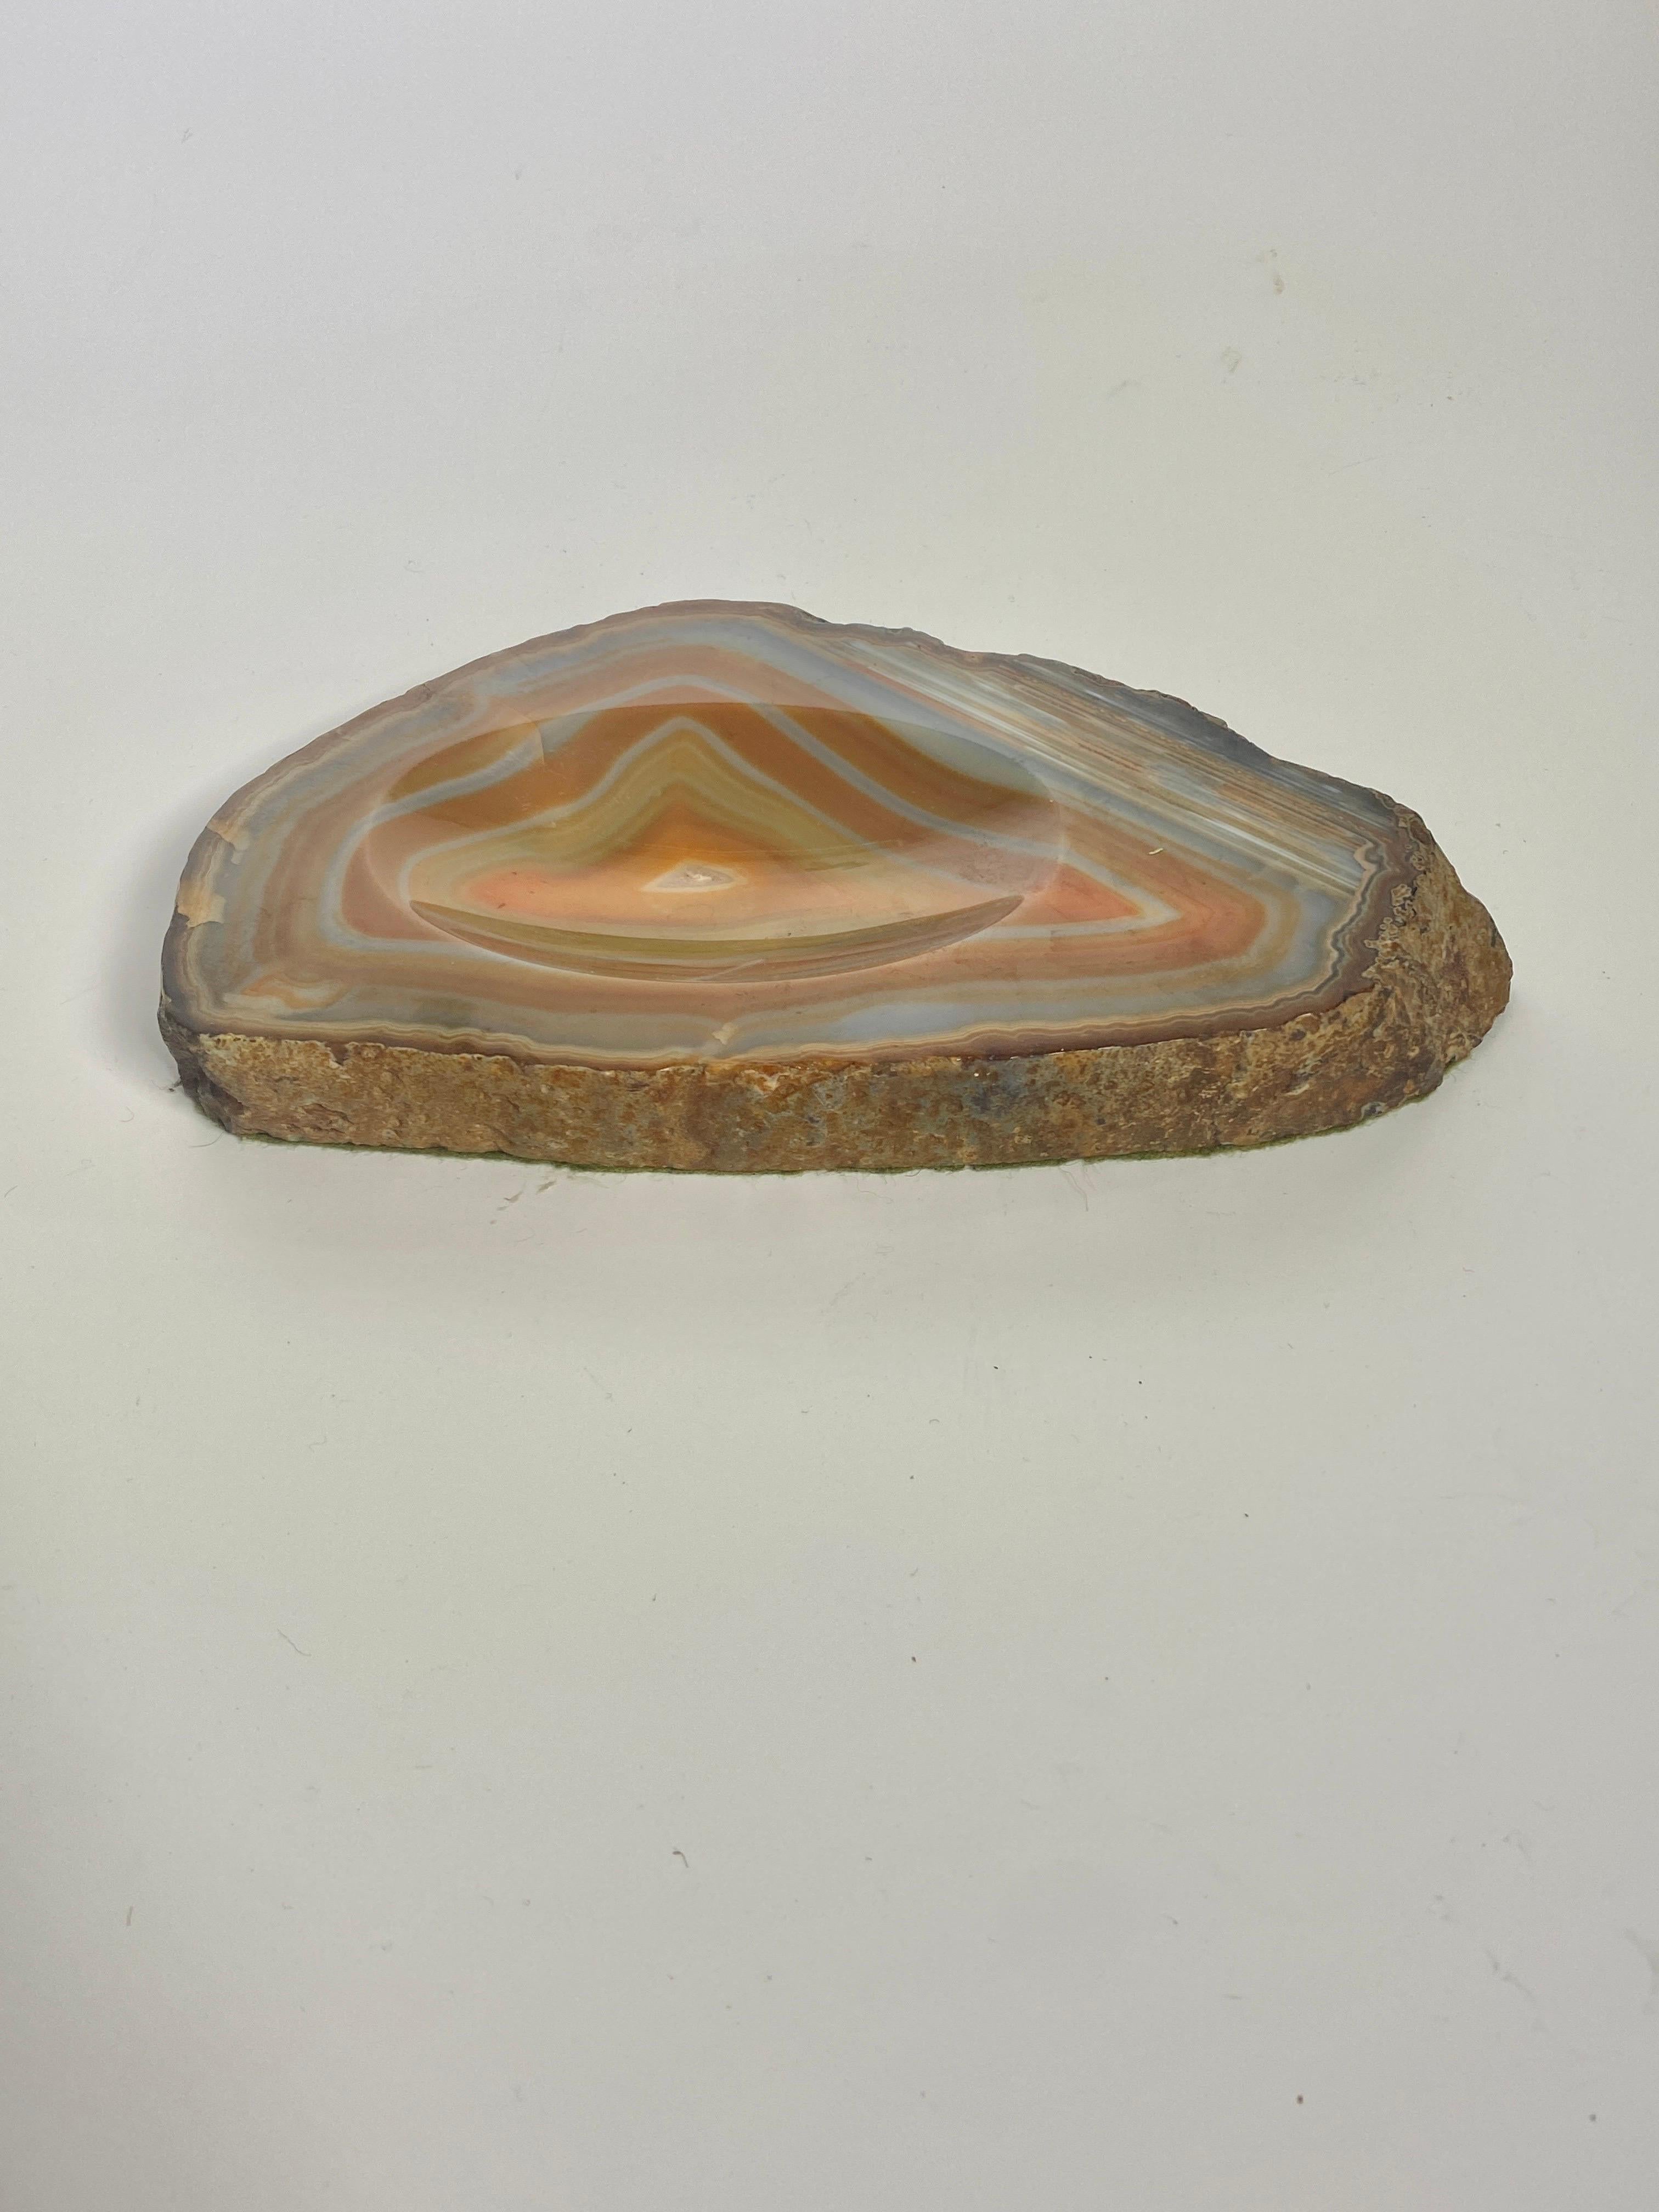 Polished Agate Ashtray or Vide Poche, Grey and Brown Color, Italy 1950 For Sale